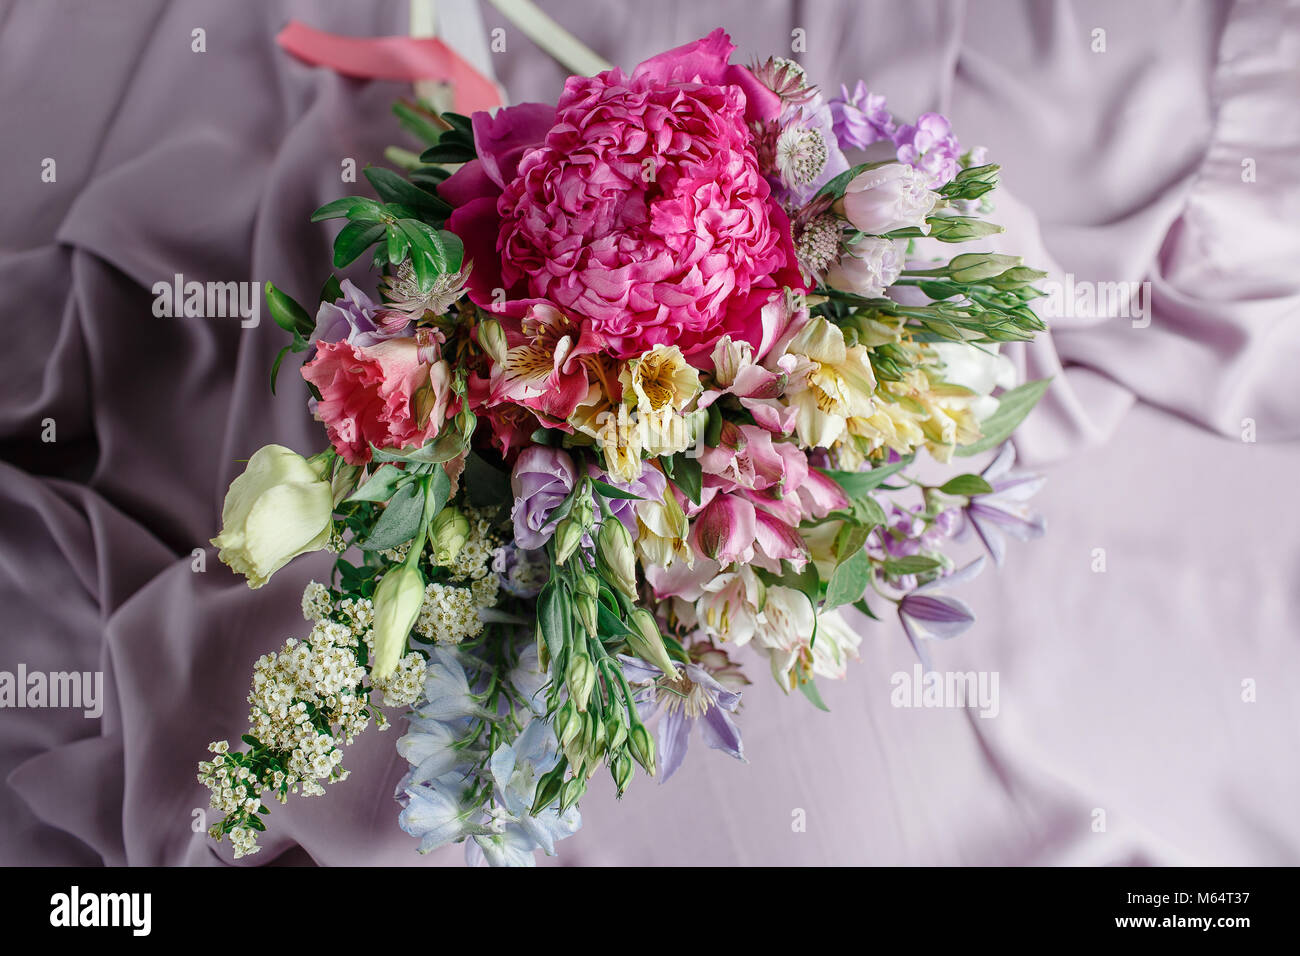 flower composition with peonies. Color pink, green, lavander, blue. beautiful luxury bouquet of mixed flowers. the work of the florist at a flower shop Stock Photo